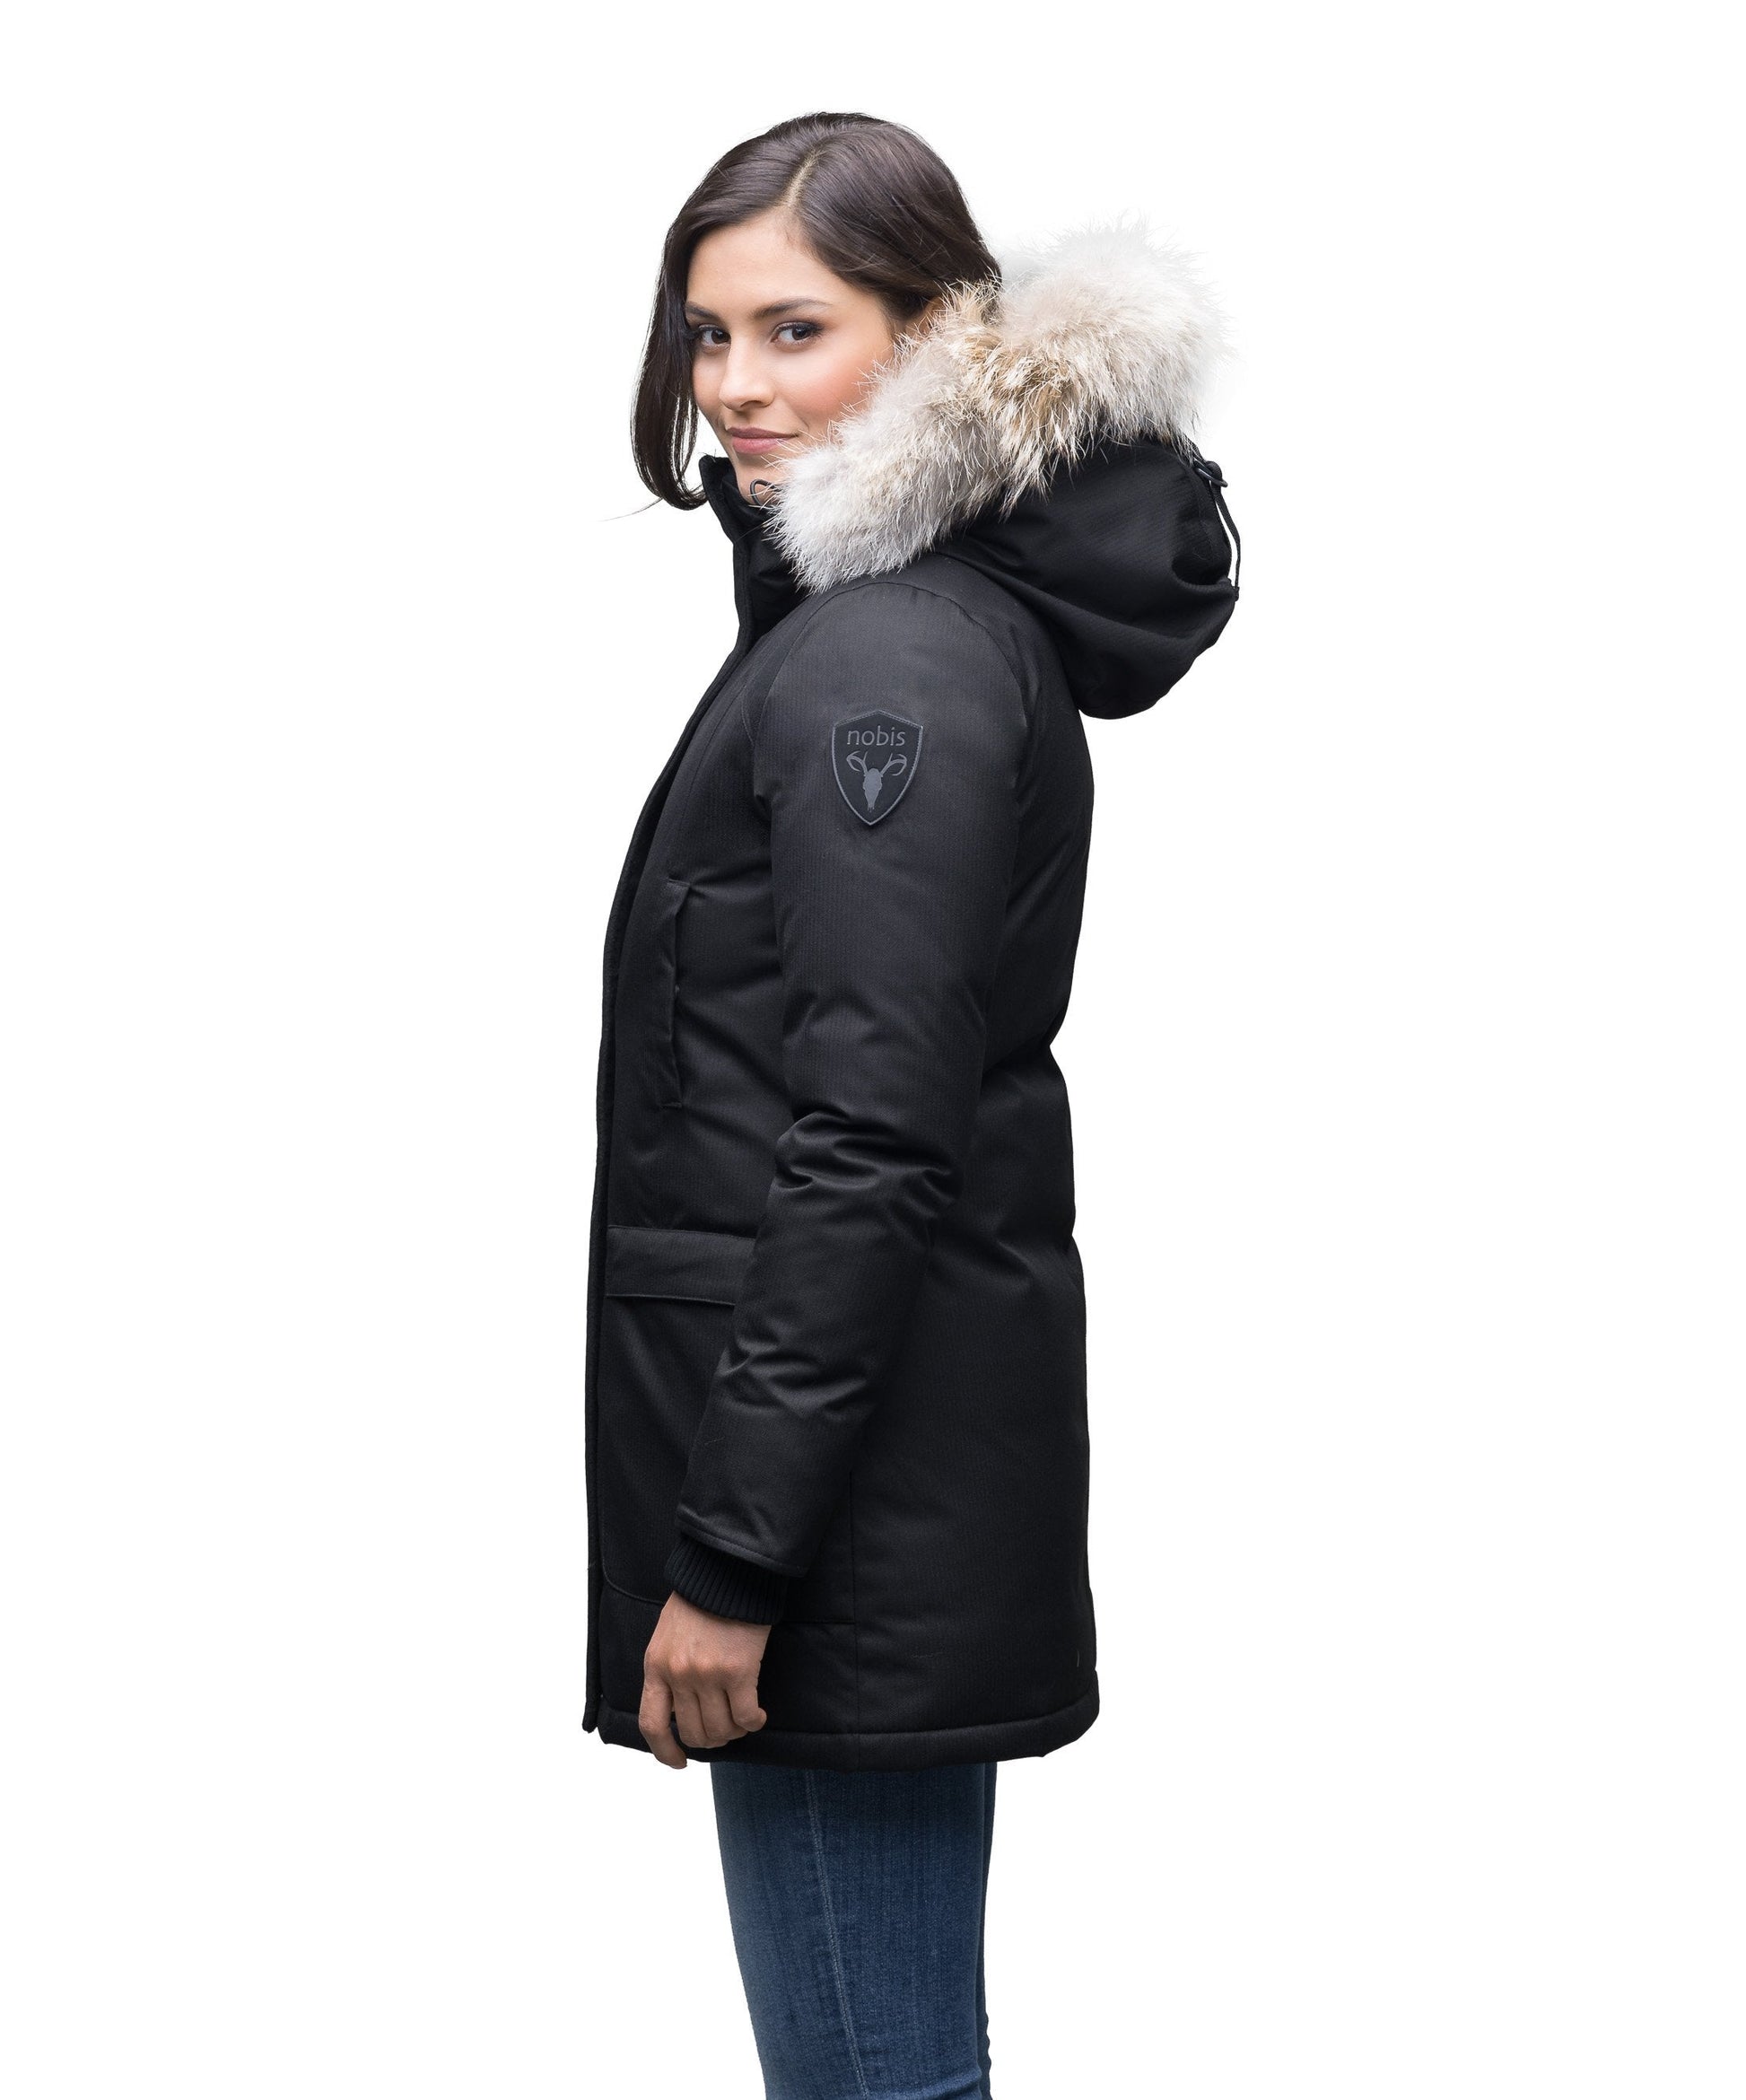 Women's down filled parka that sits just below the hip with a clean look and two hip patch pockets in CH Black